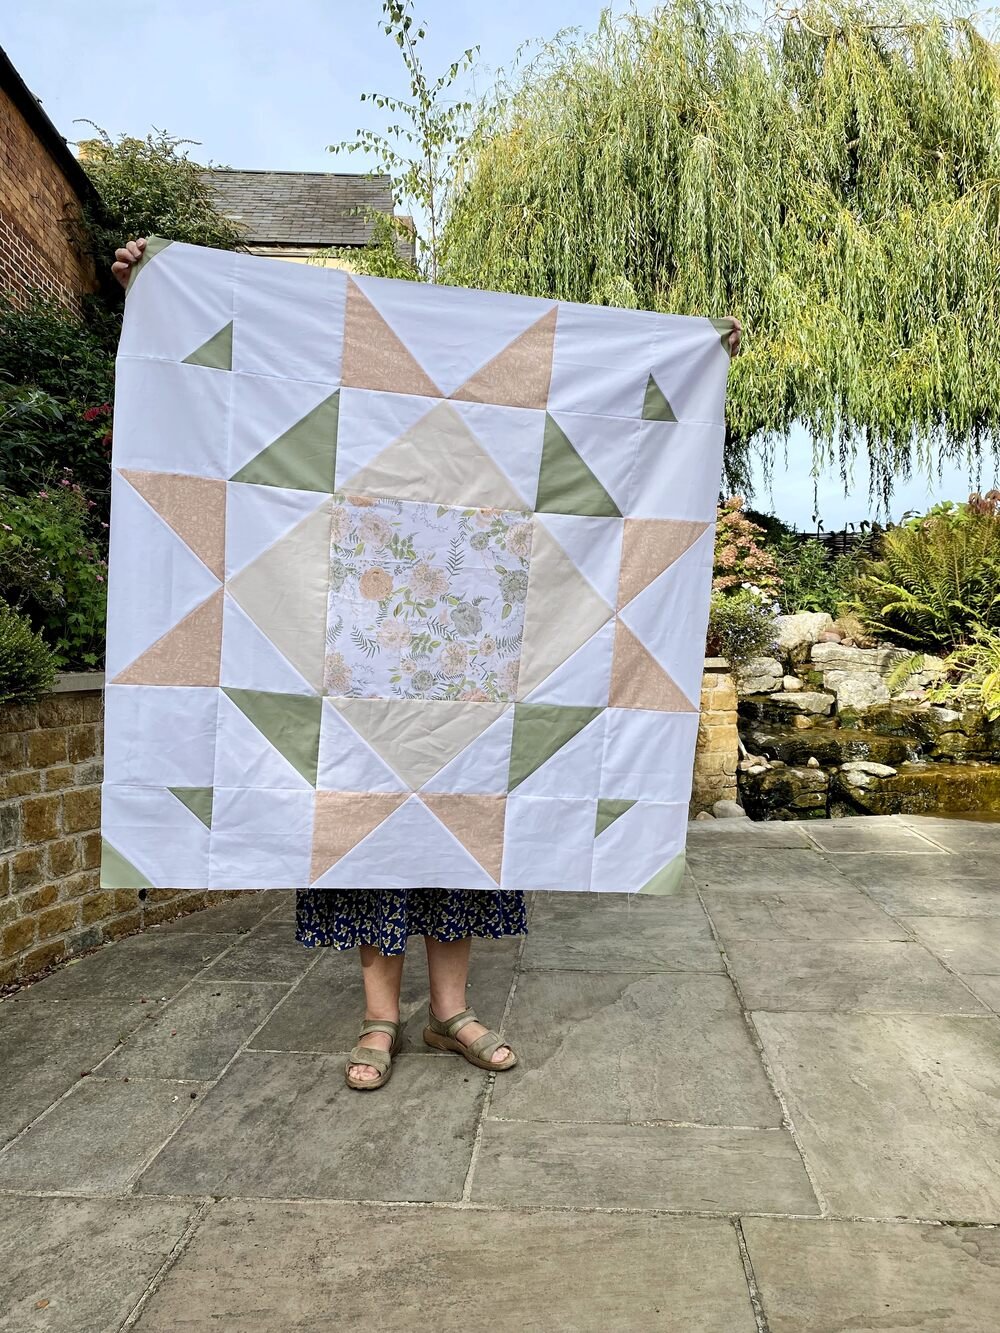 A finished quilt top made at the Cowden Quilt School annual quilting retreat in Rutland, England